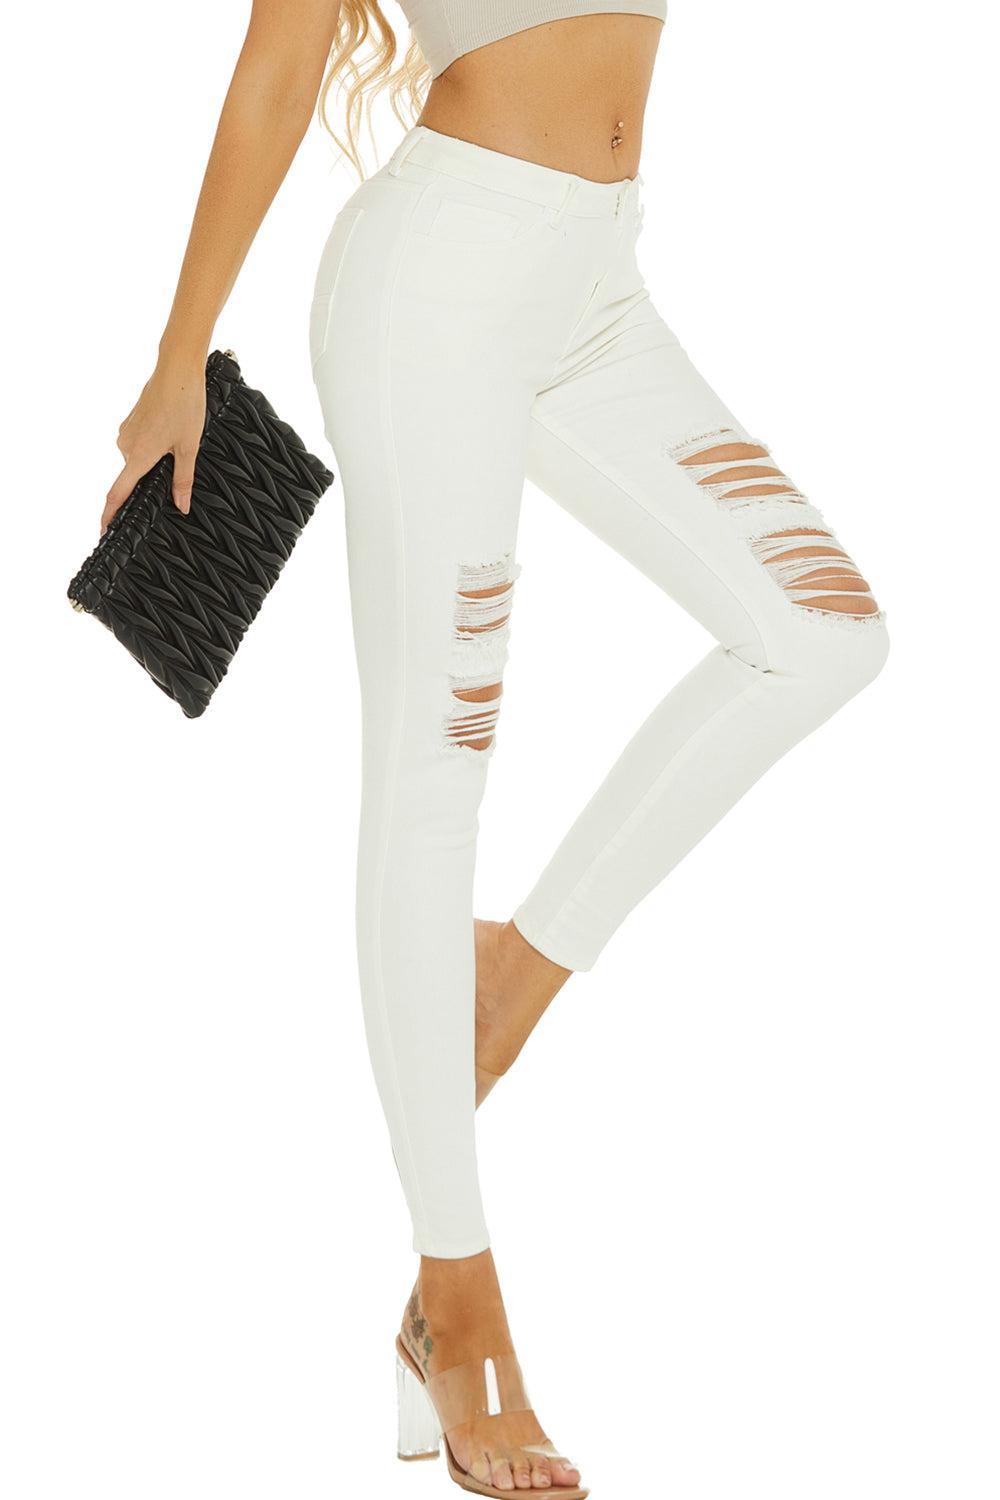 a woman in white ripped jeans holding a black purse